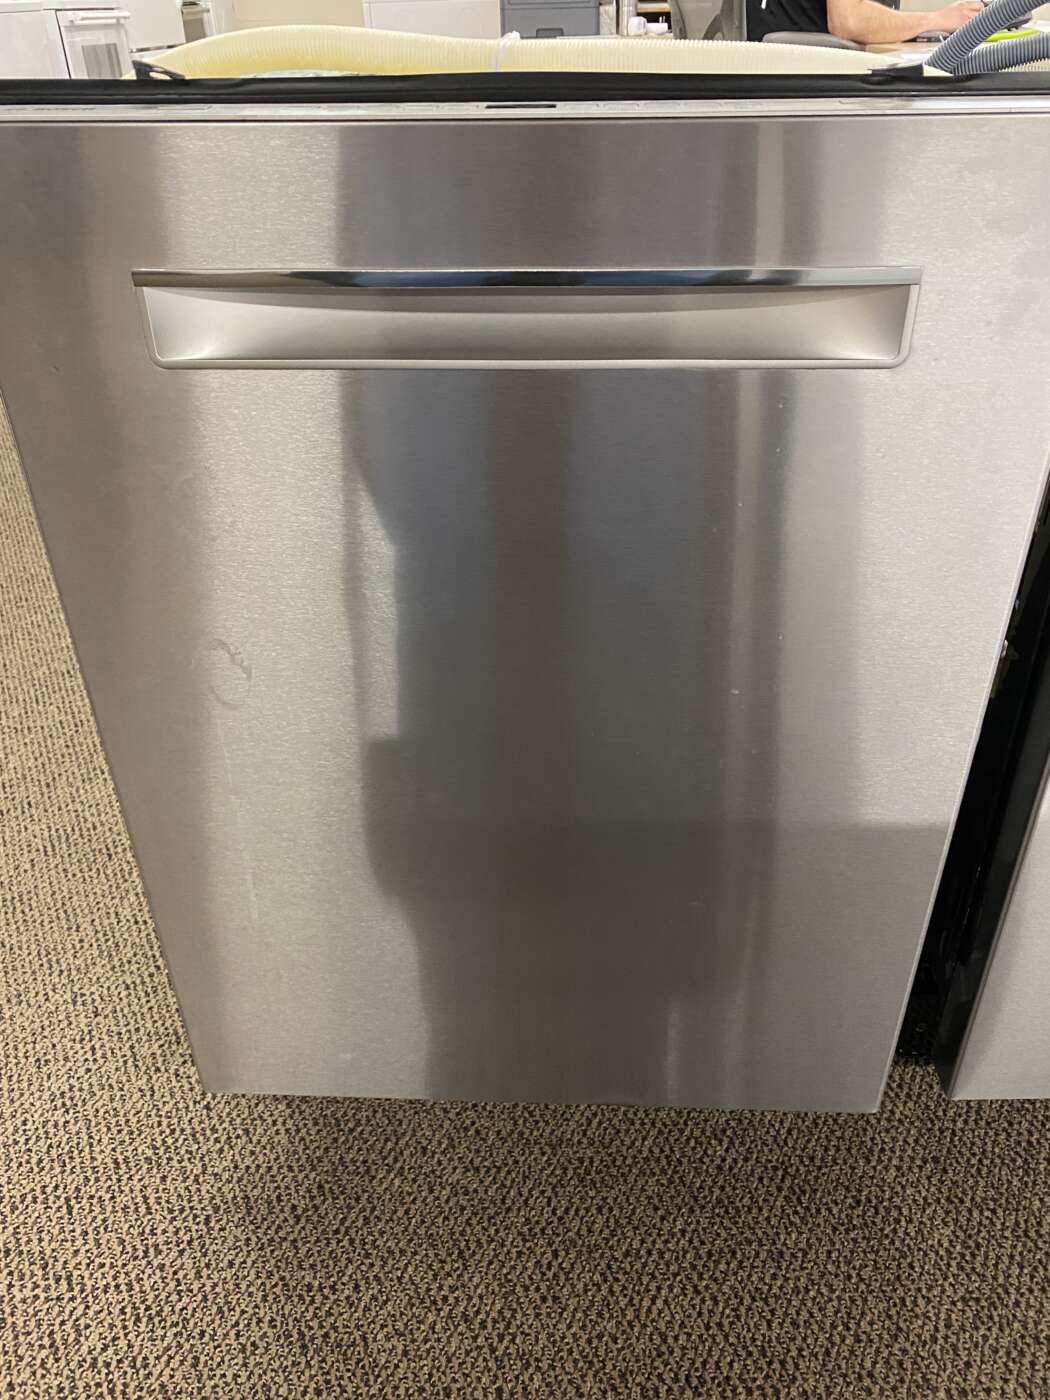 Reconditioned BOSCH Stainless-Tub Built-In Dishwasher With 3-Racks – Stainless